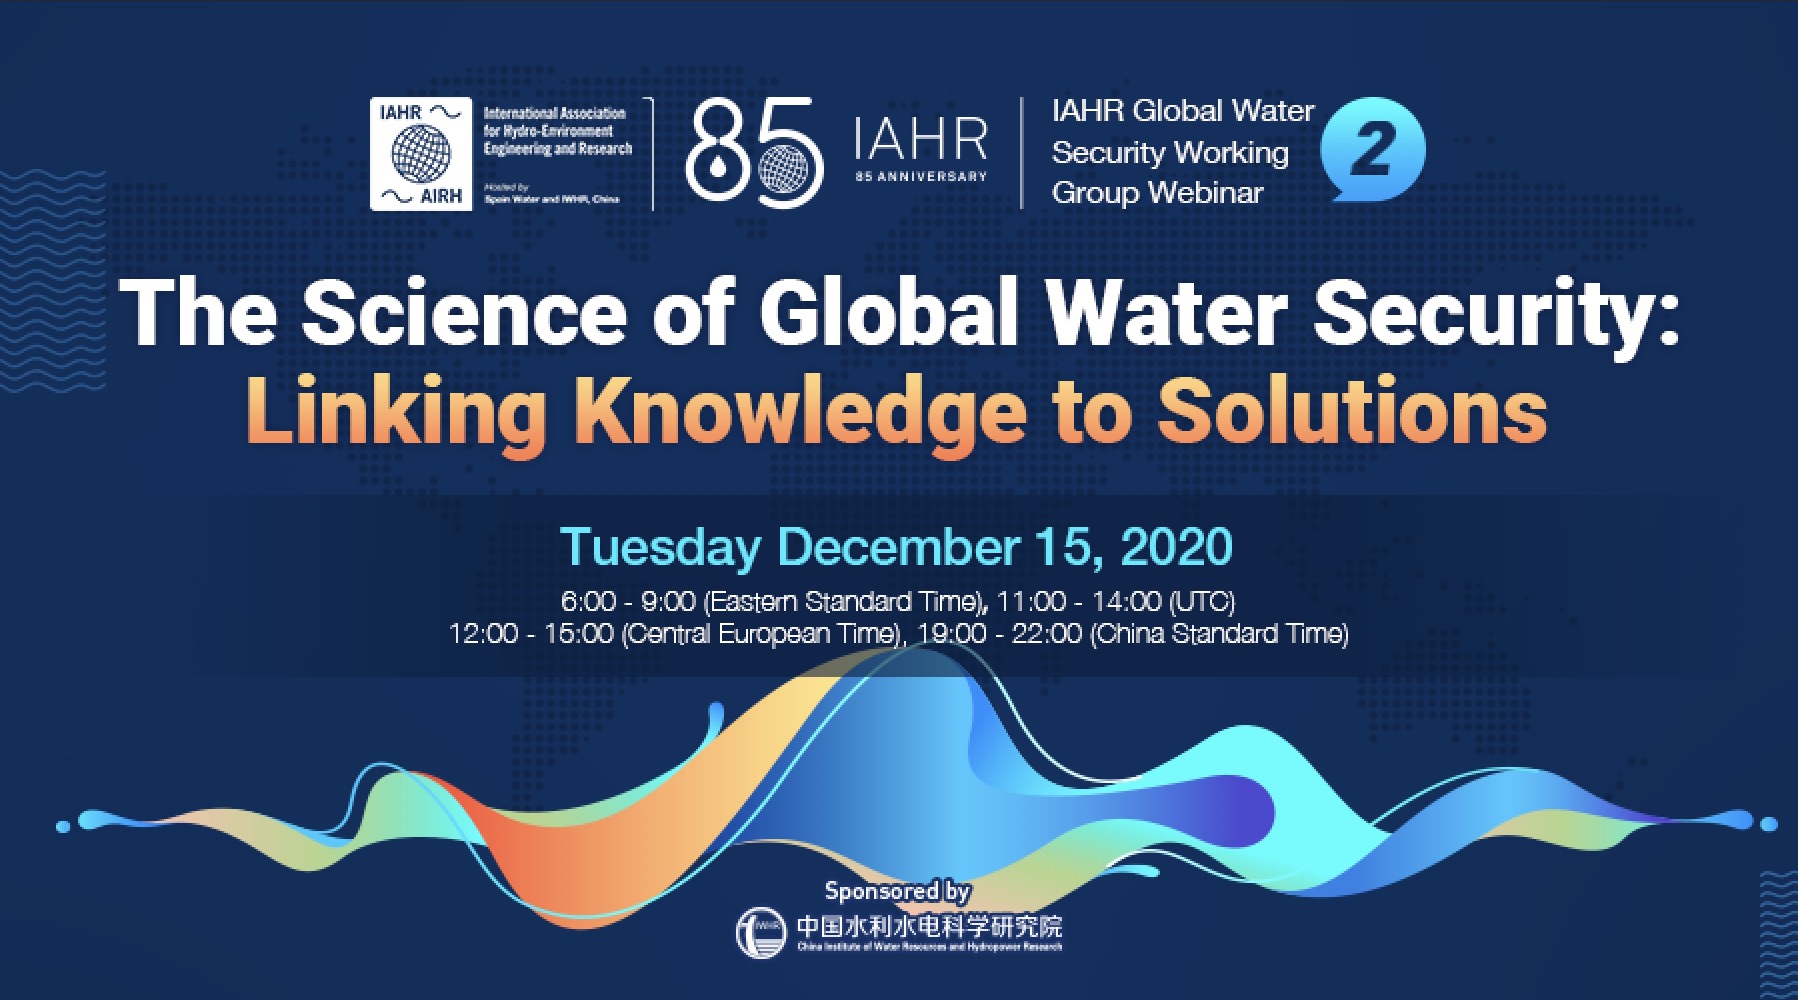 Webinar: The Science of Global Water Security: Linking Knowledge to Solutions